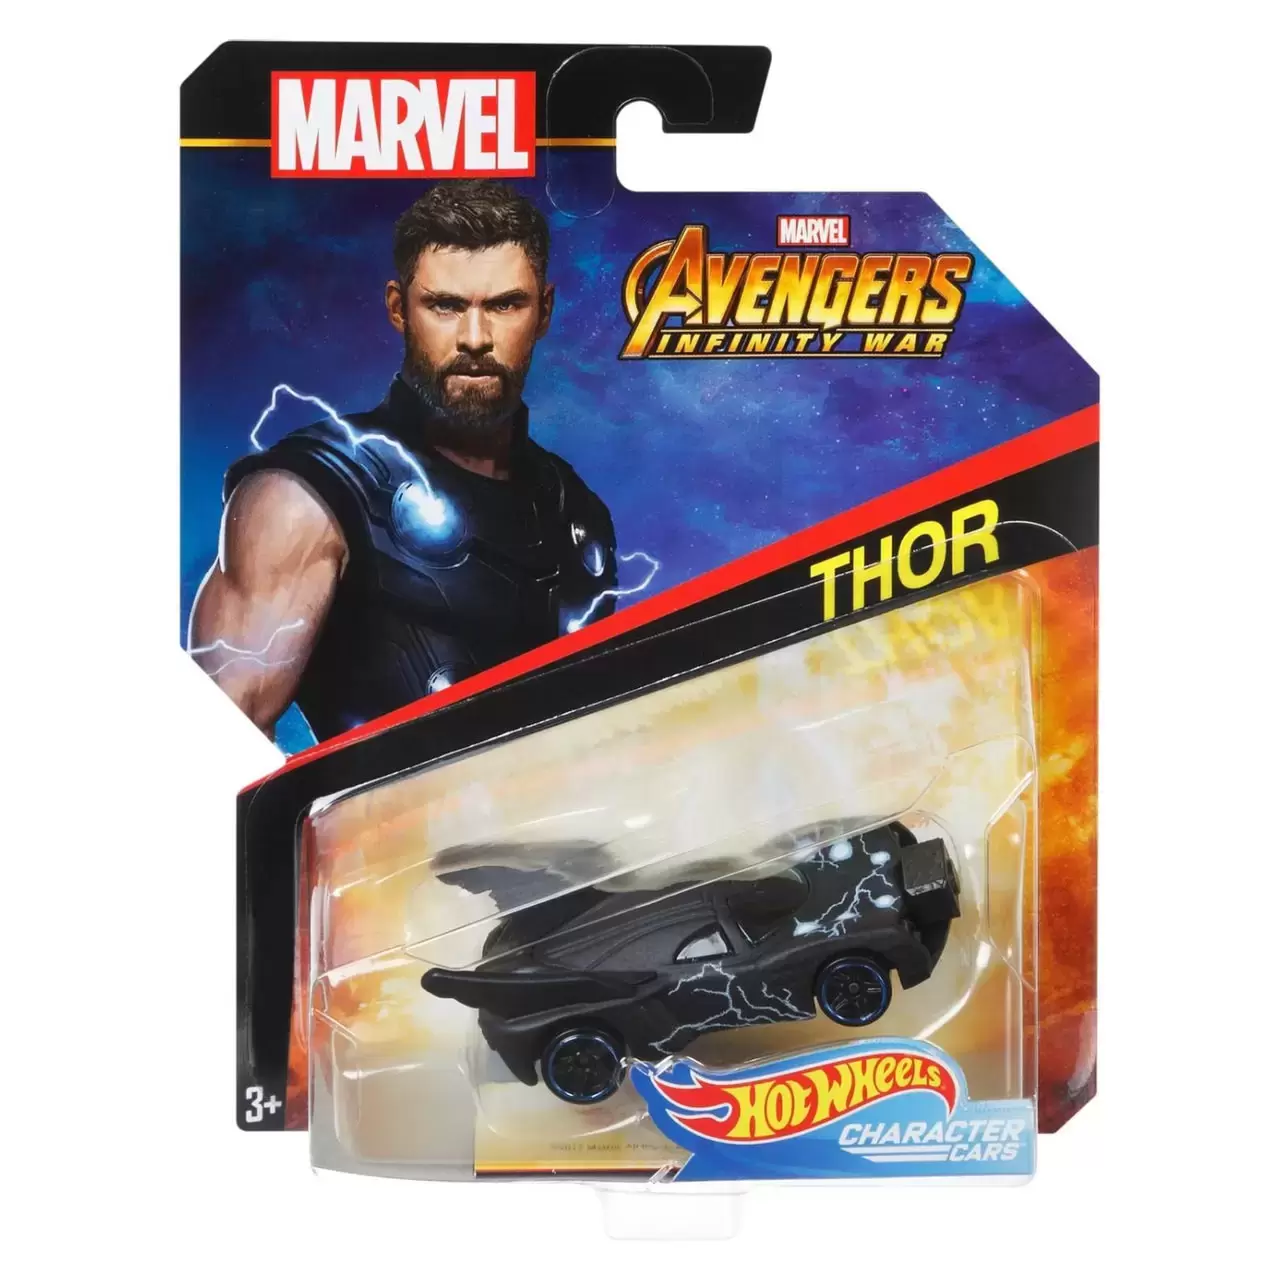 Marvel Character Cars - Avengers Infinity Wars - Thor